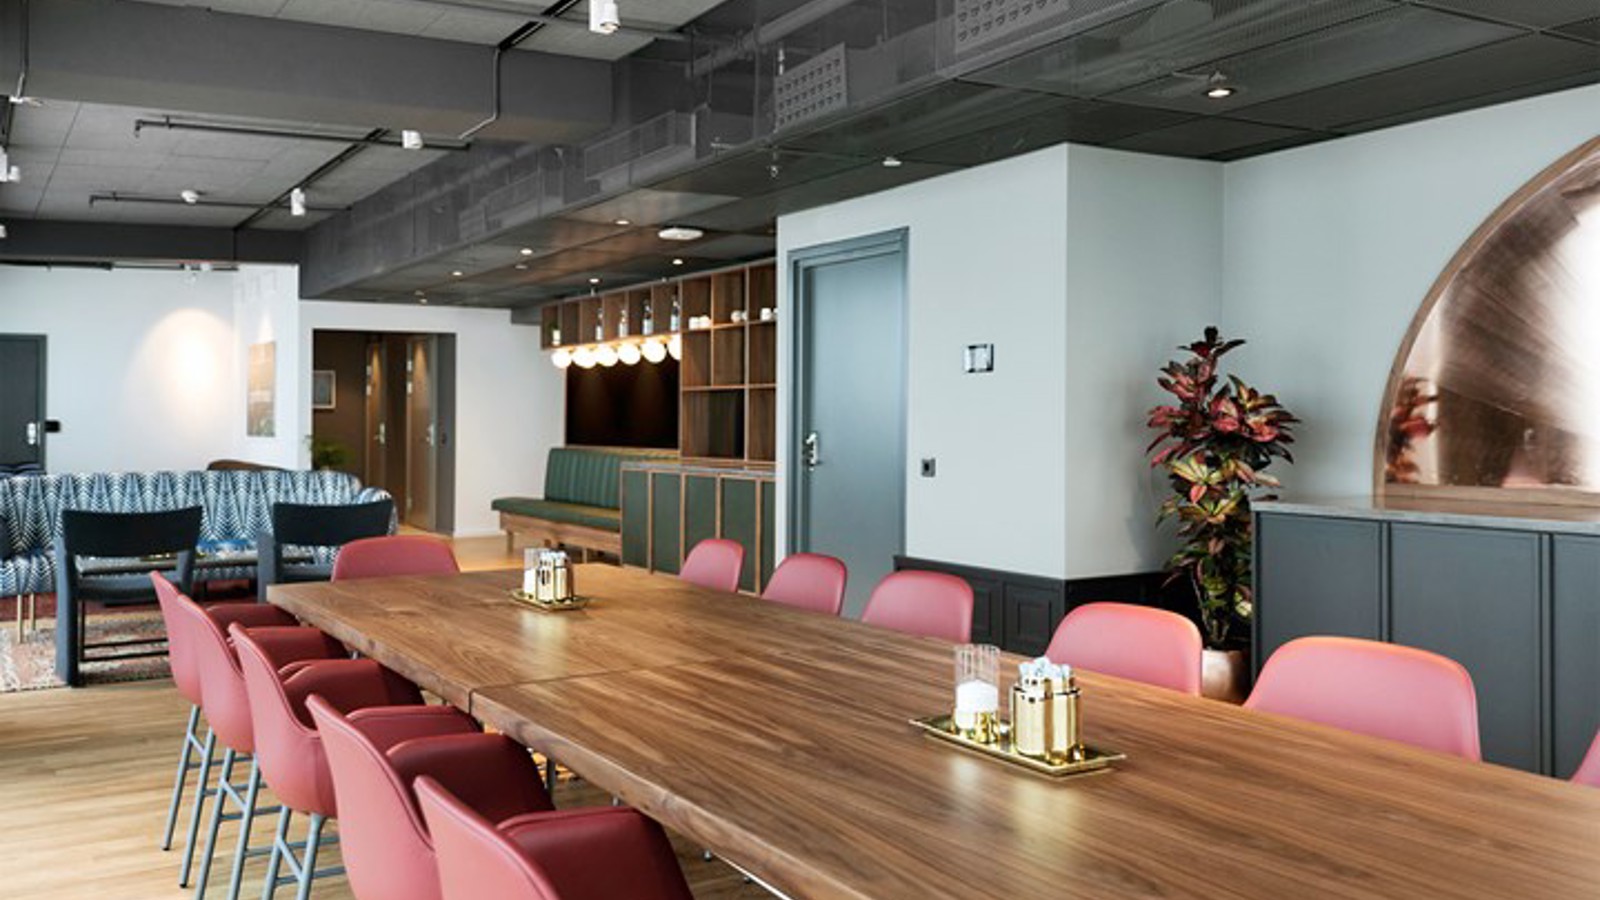 Conference room with board seating, brown table and red chairs